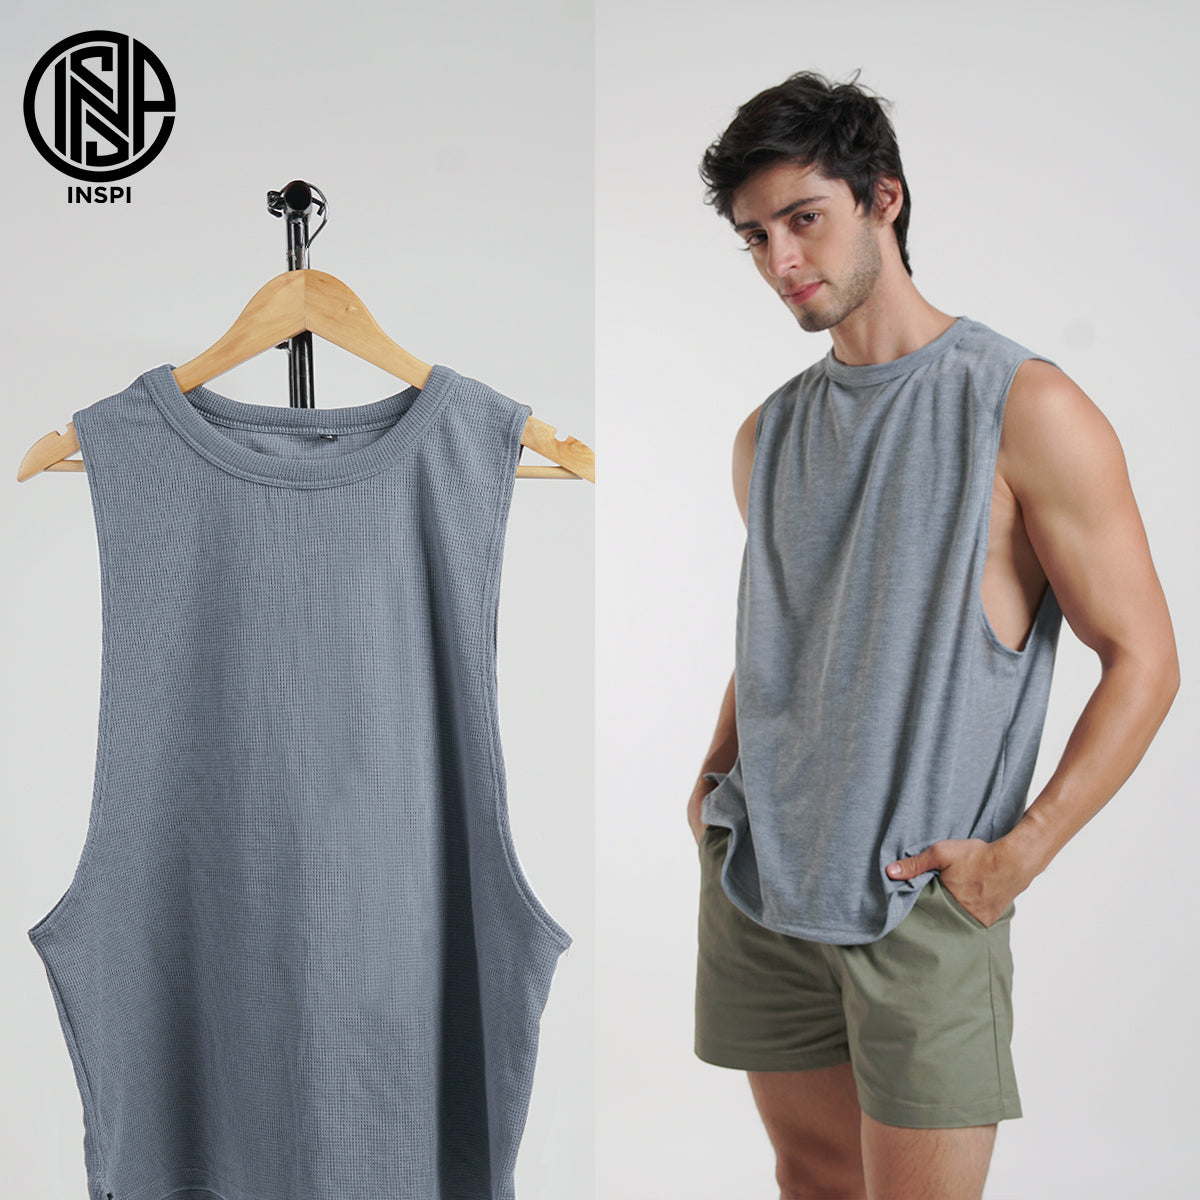 INSPI Waffle Muscle Tee Light Gray Sando for Men Plain Sleeveless Tank Top Gym Workout Exercise Beach Outfit